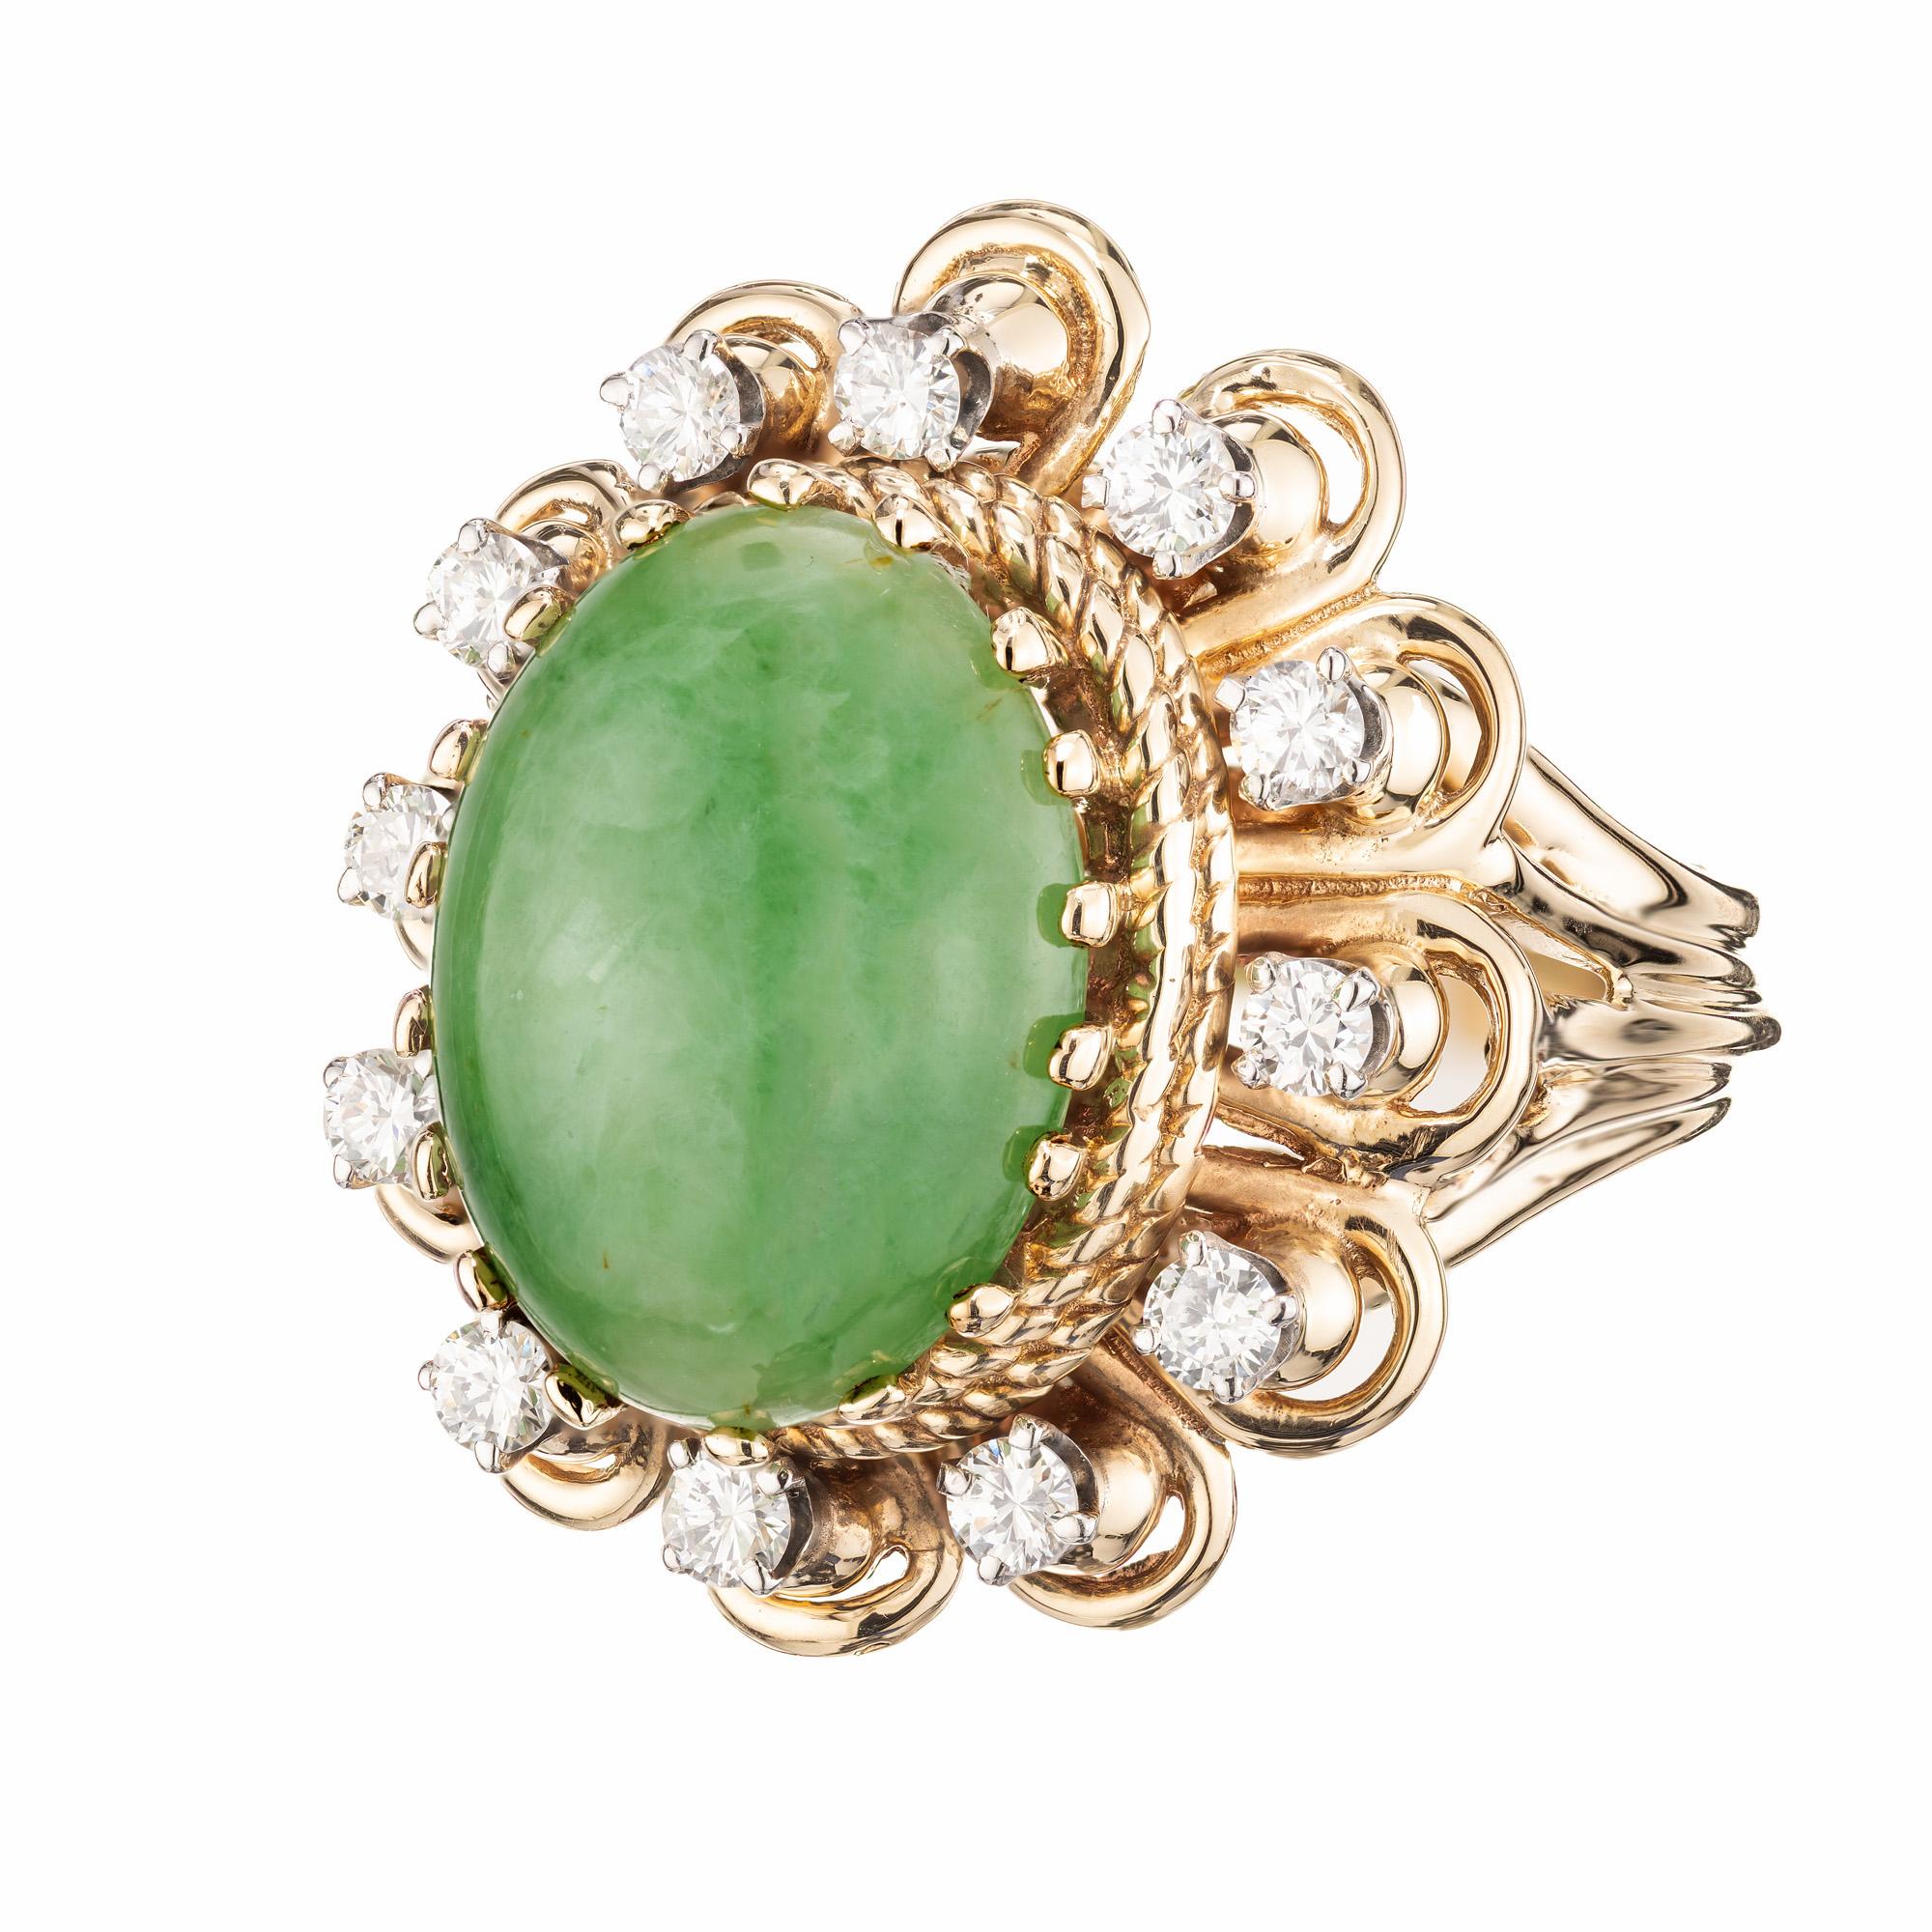 A beautifully crafted jadeite jade and diamond fashion ring. Dated from around the 1950’s this ring is 14k yellow gold with a 6.7 carat center jade oval that is GIA certified encircled by 12 round brilliant cut diamonds. The design showcases a blend